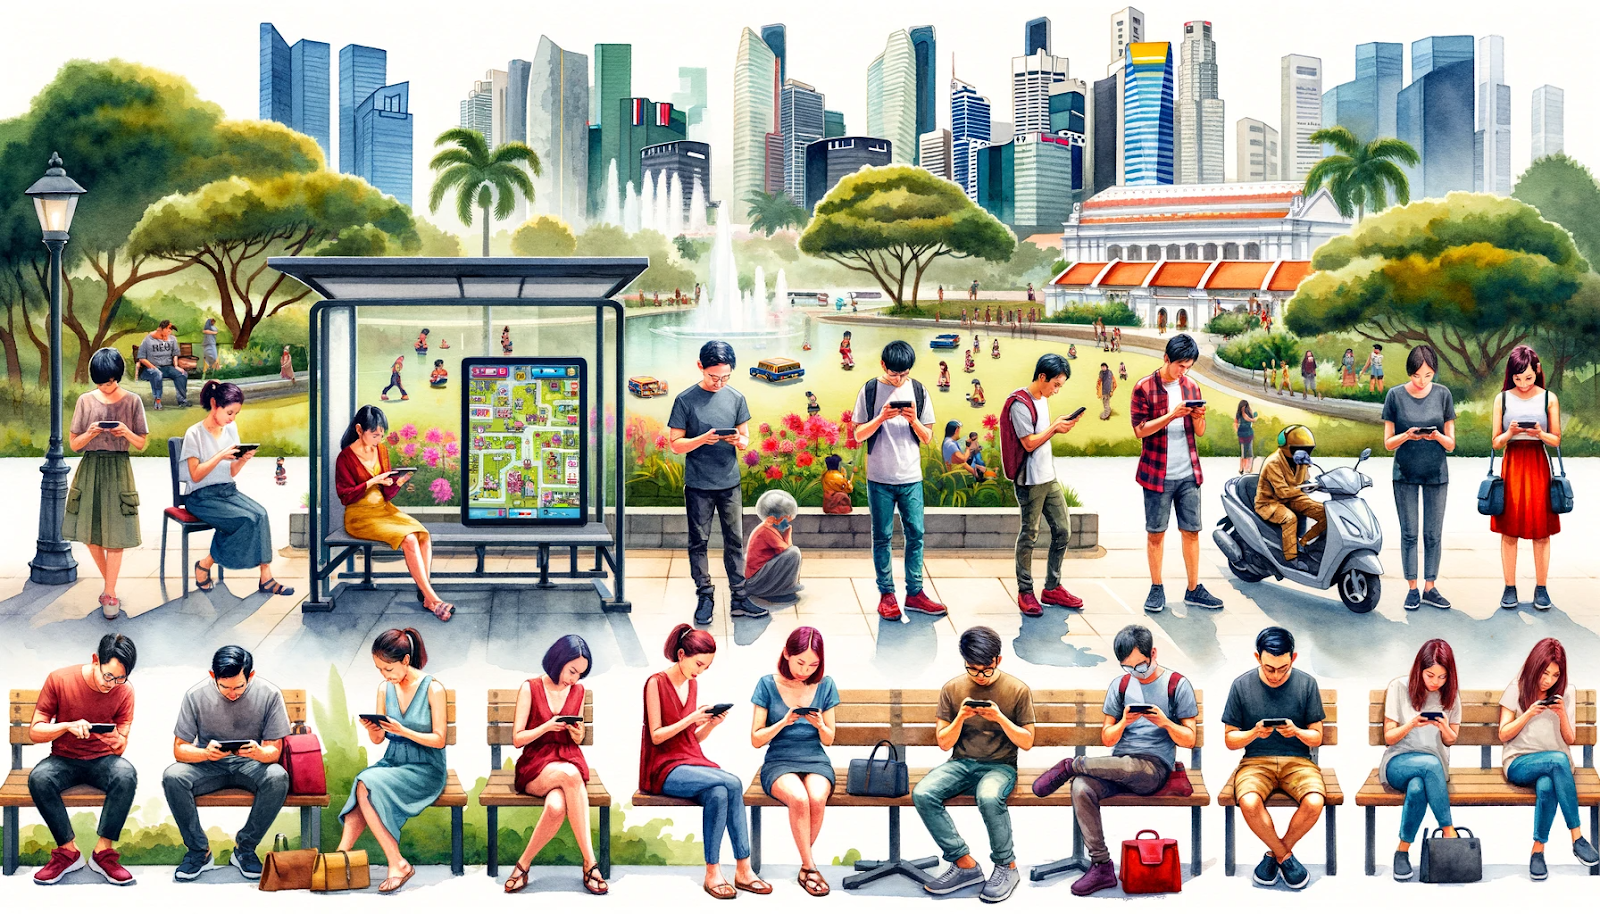 Game marketing strategies in singapore - People in various locations in Singapore playing mobile games on their phones and tablets